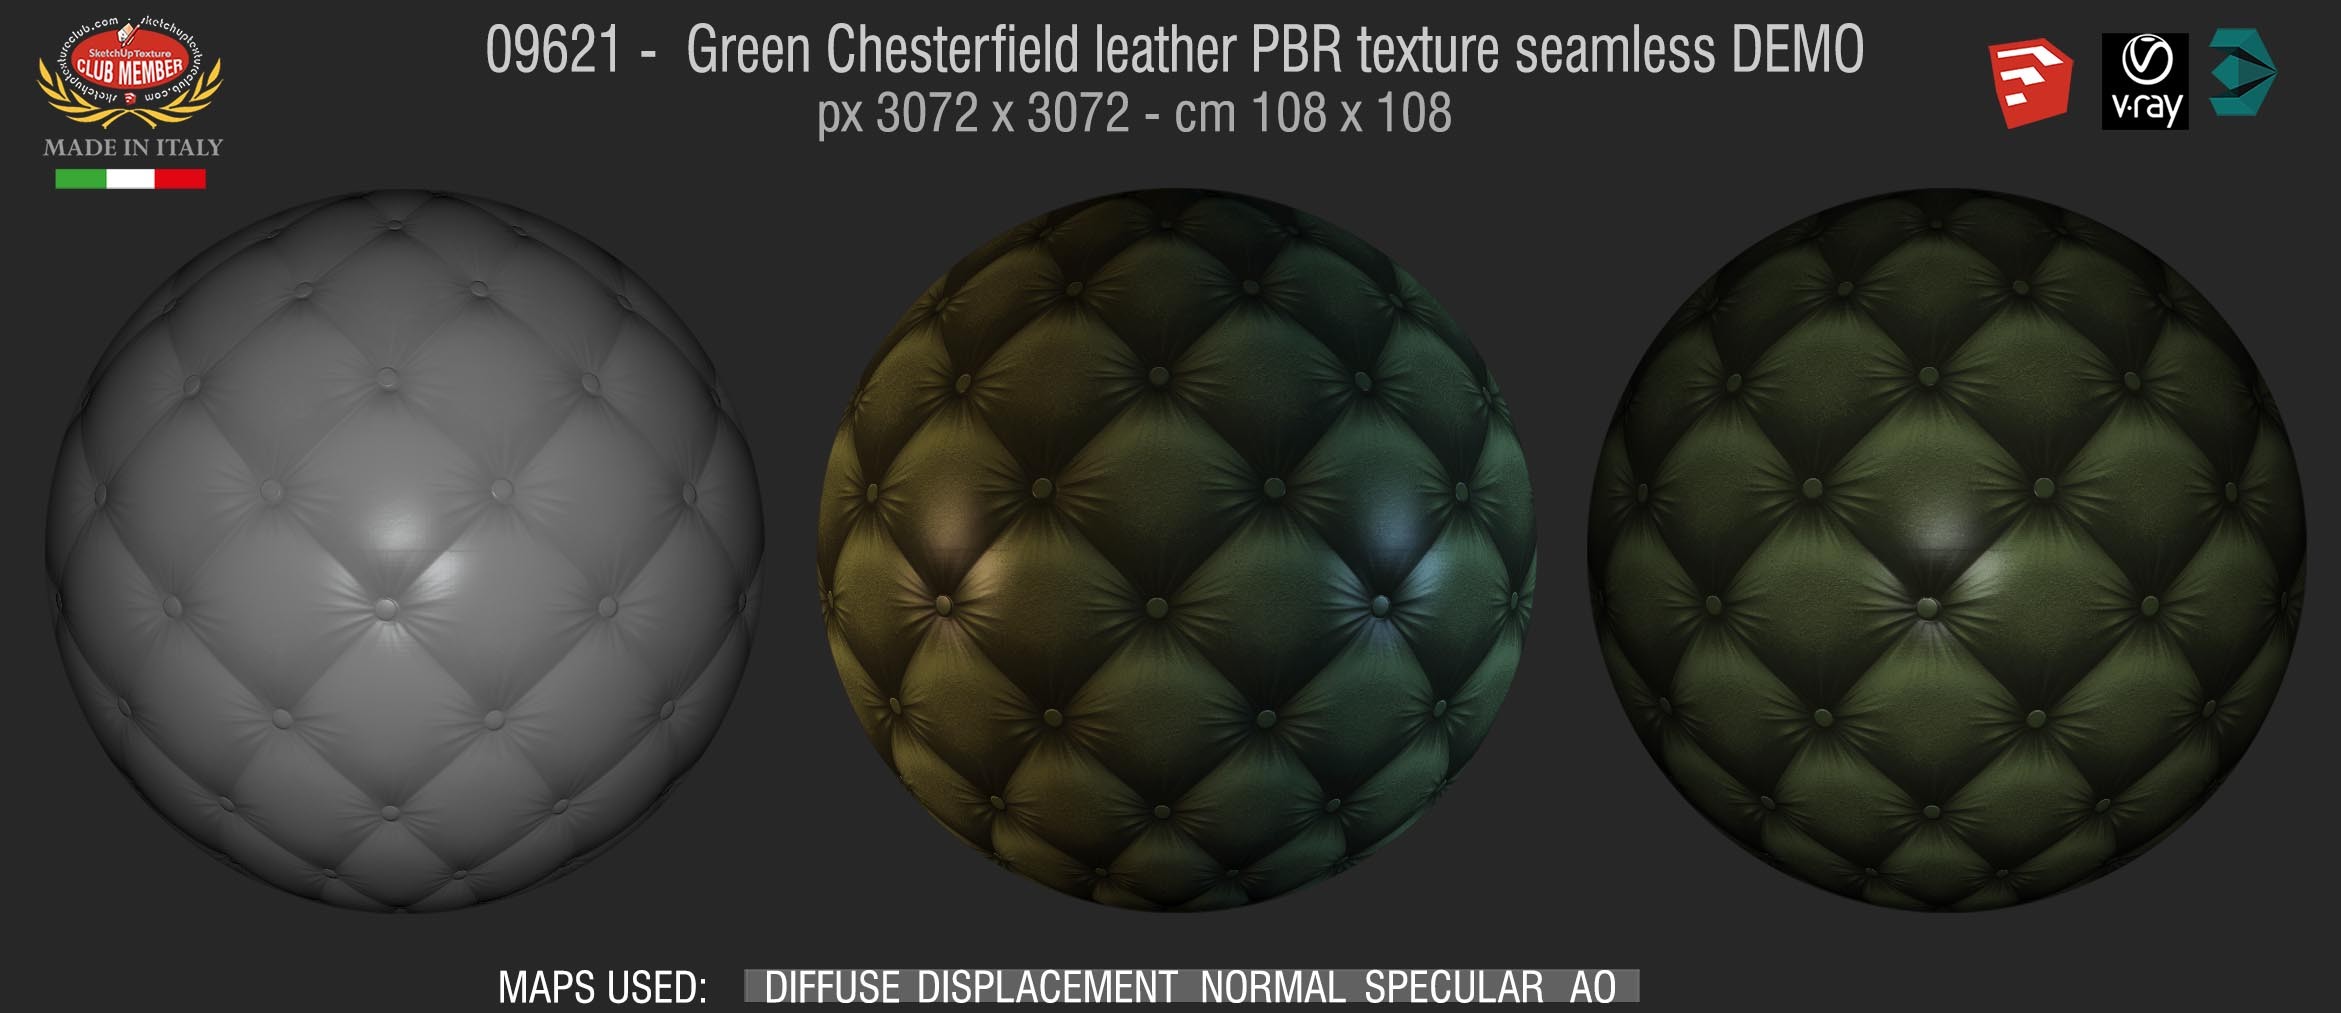 09621 Green Chesterfield leather PBR texture seamless DEMO